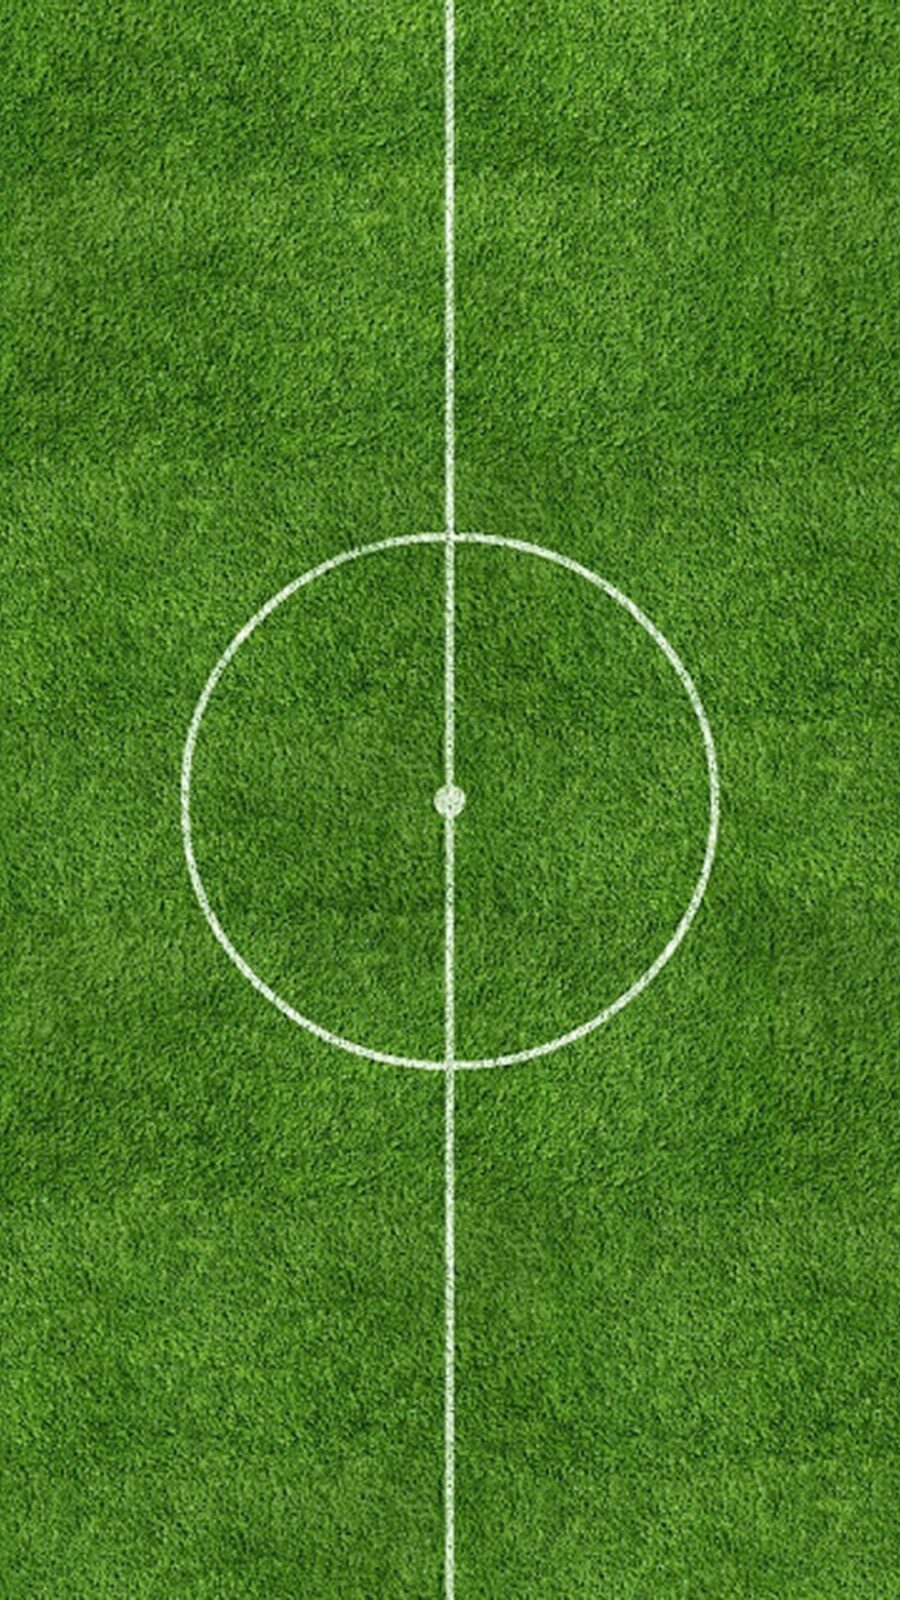 Center Football Pitch Wallpapers for Galaxy S5